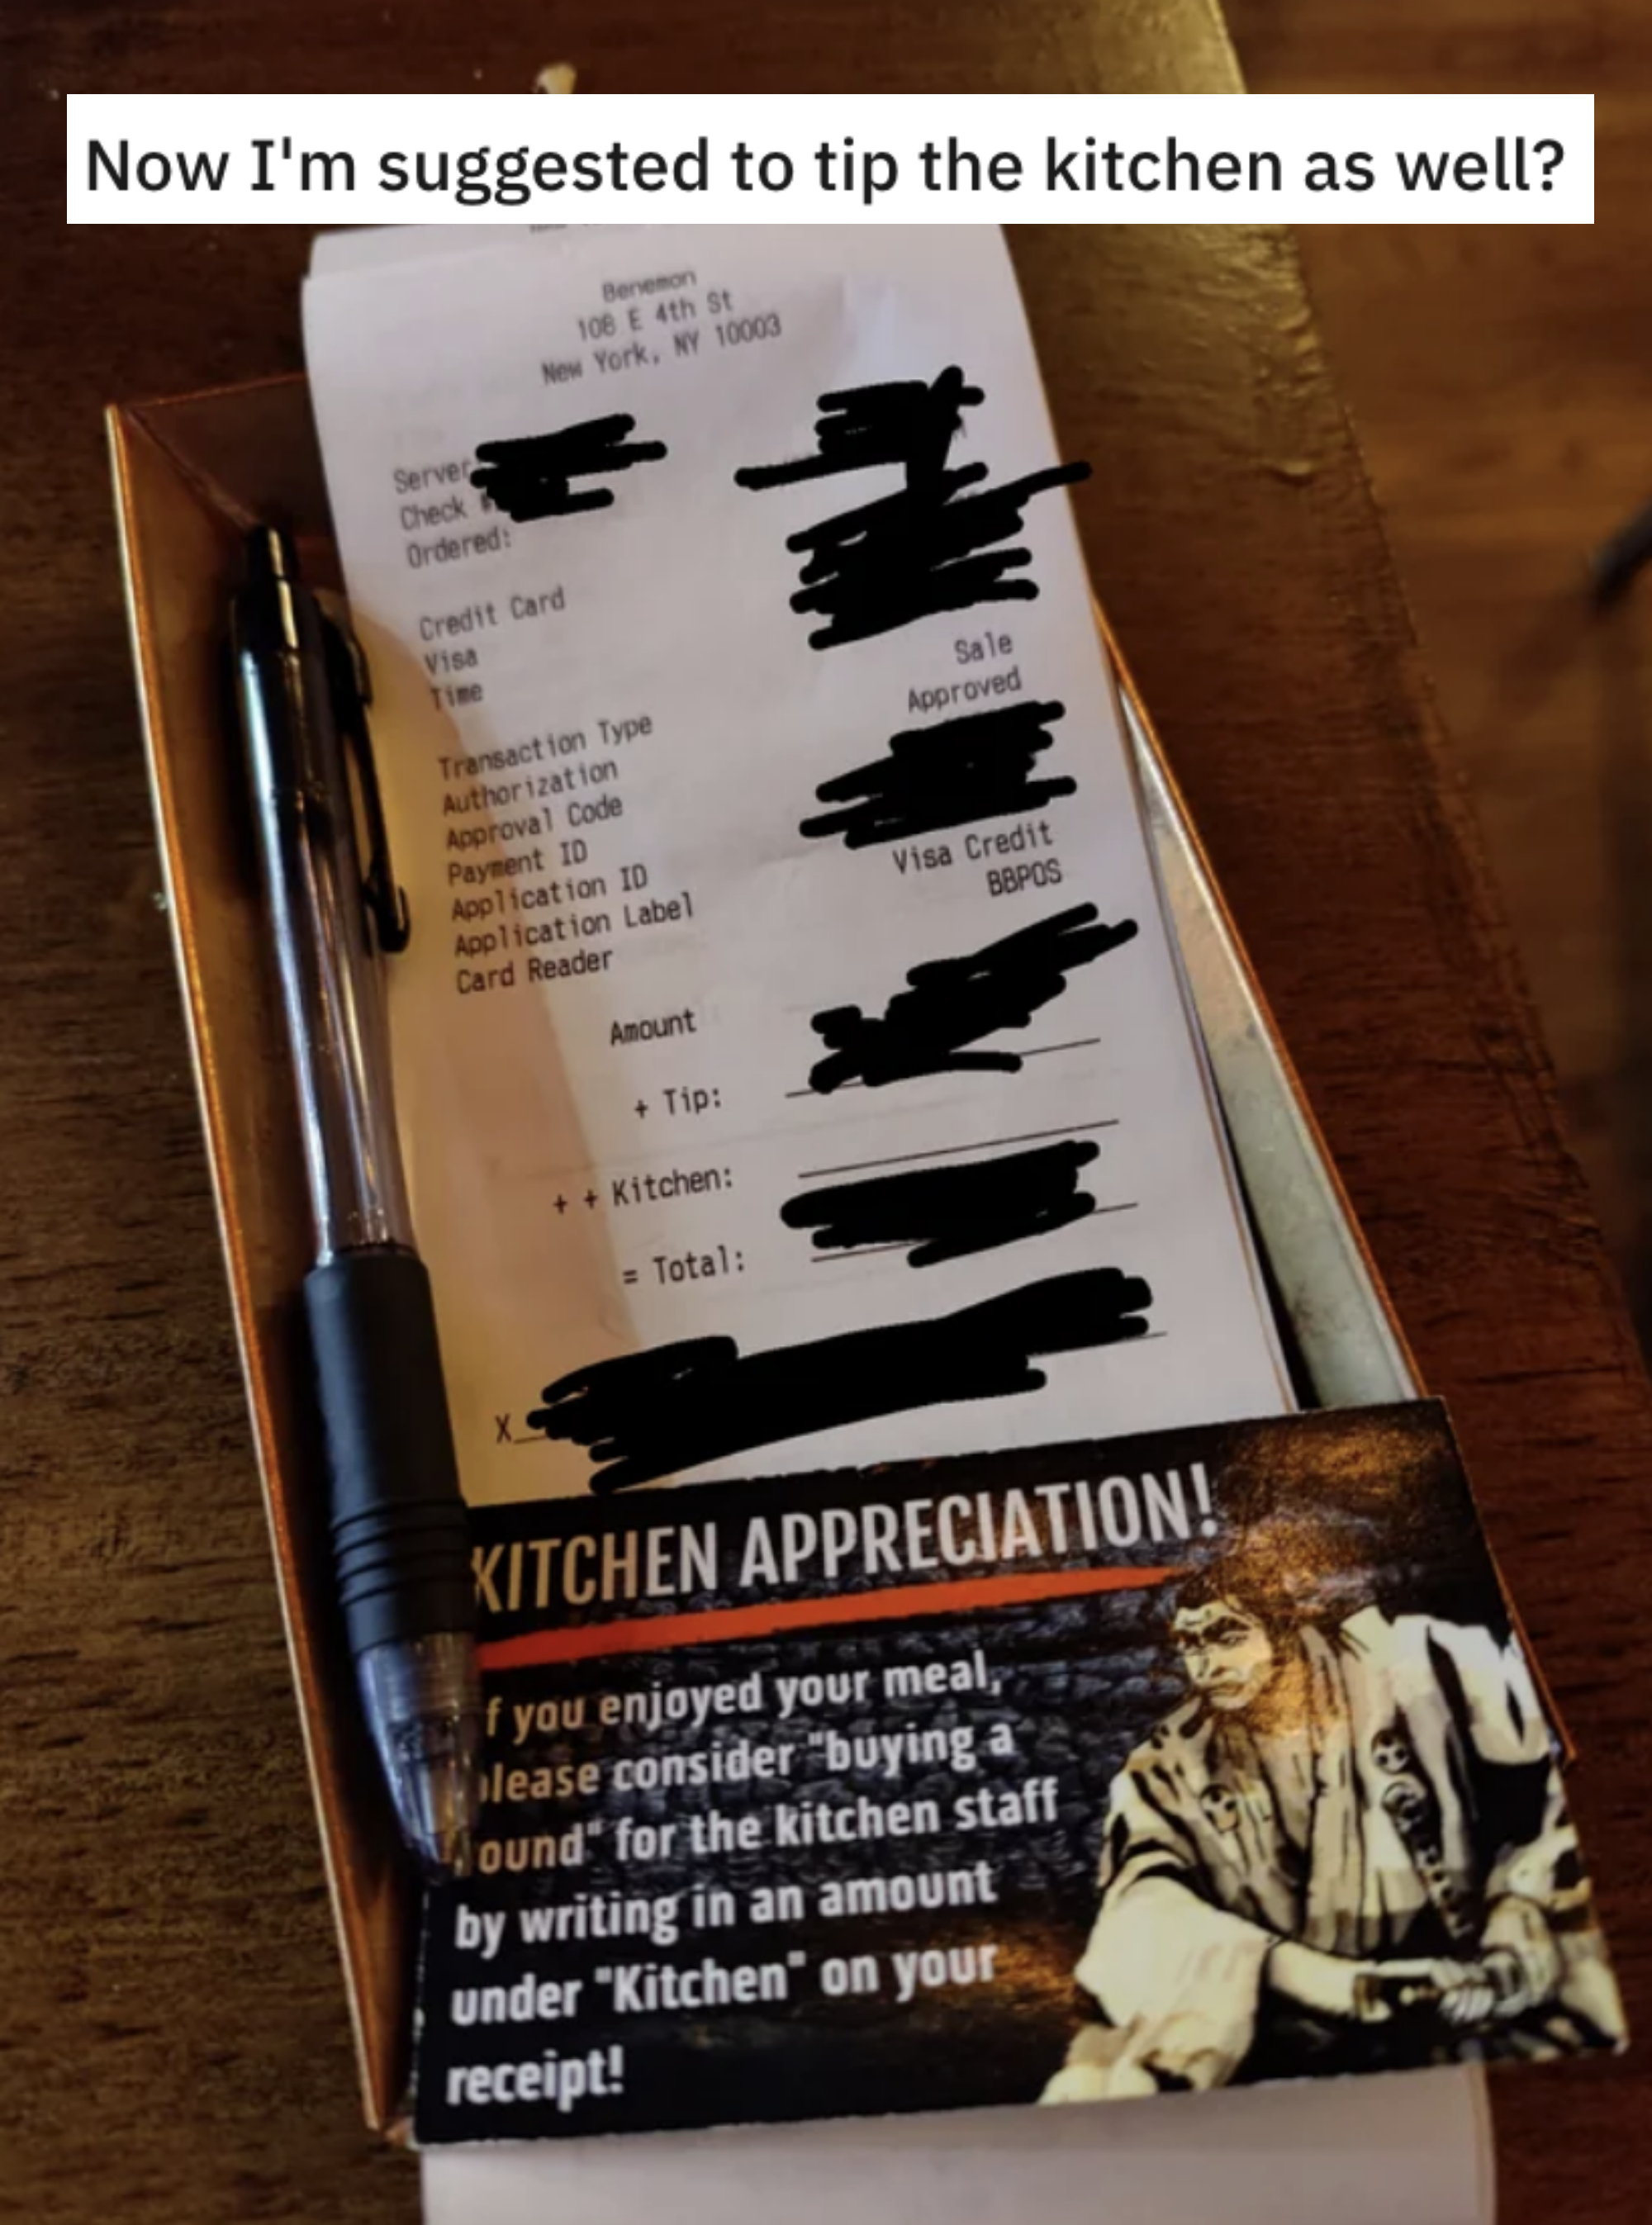 along with the bill, there&#x27;s a post-card sized reminder that you can tip the kitchen as well